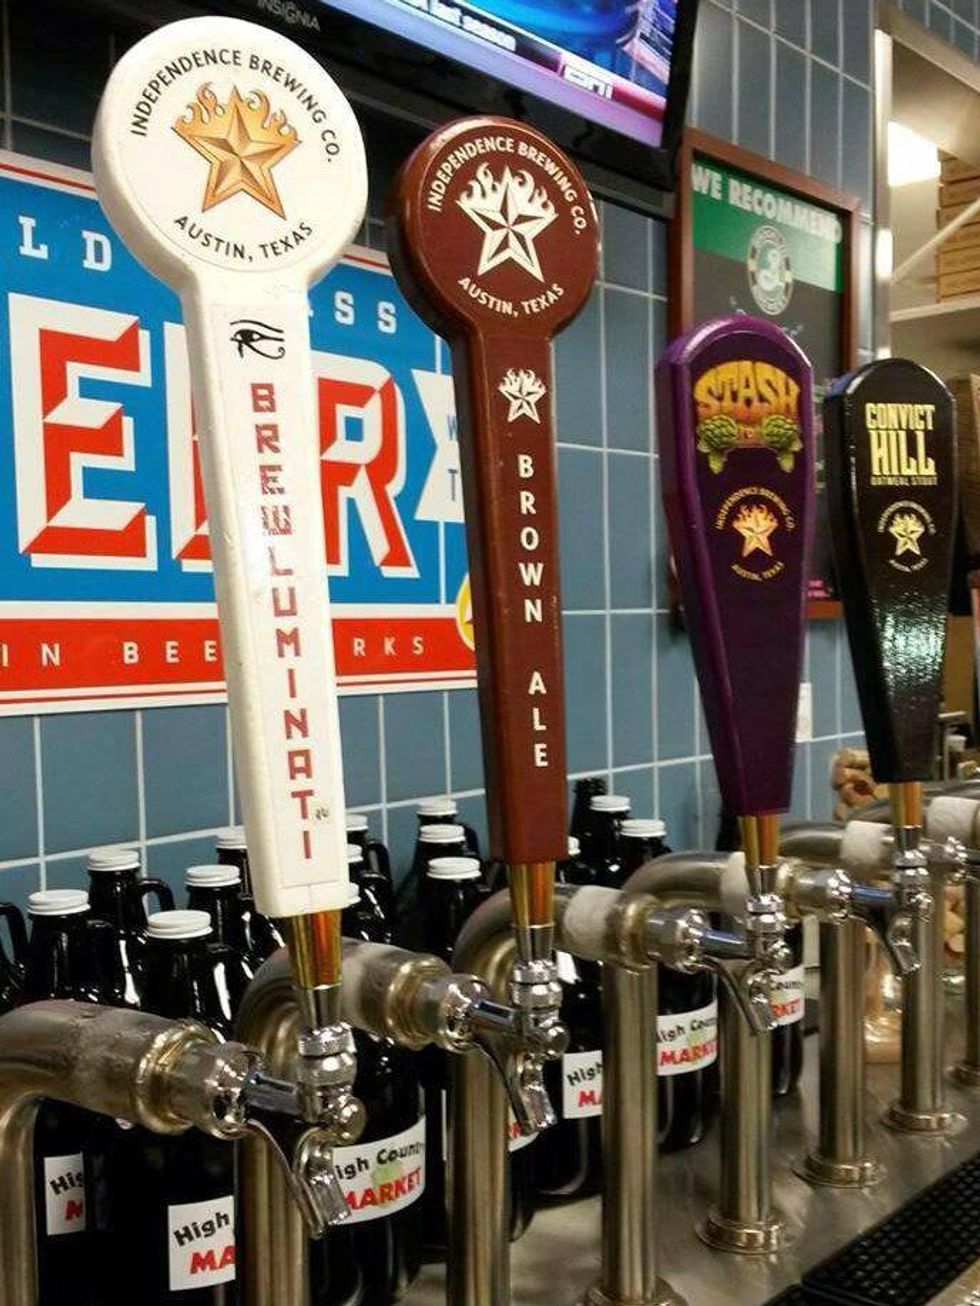 a selection of Independence Brewing Co. beers on tap